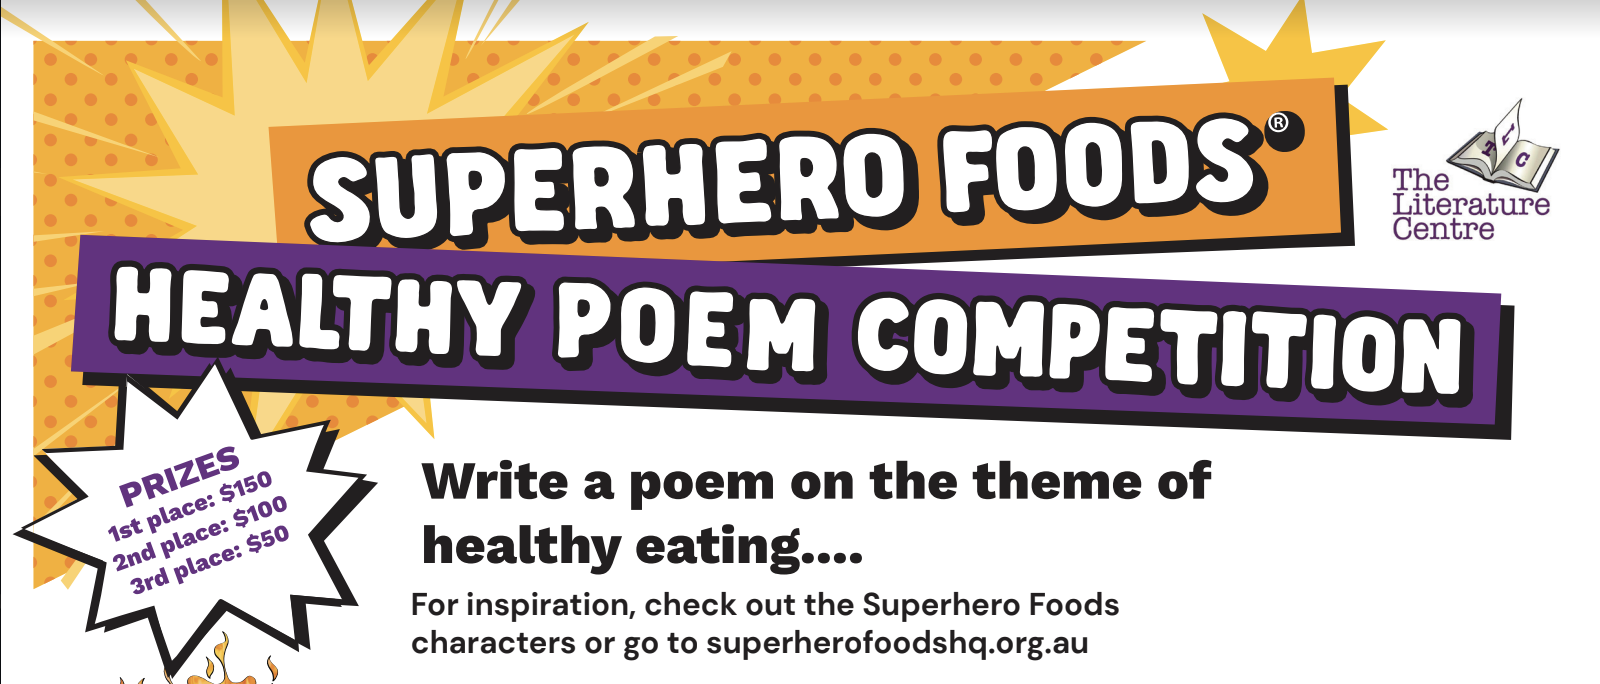 Healthy Poem Competition